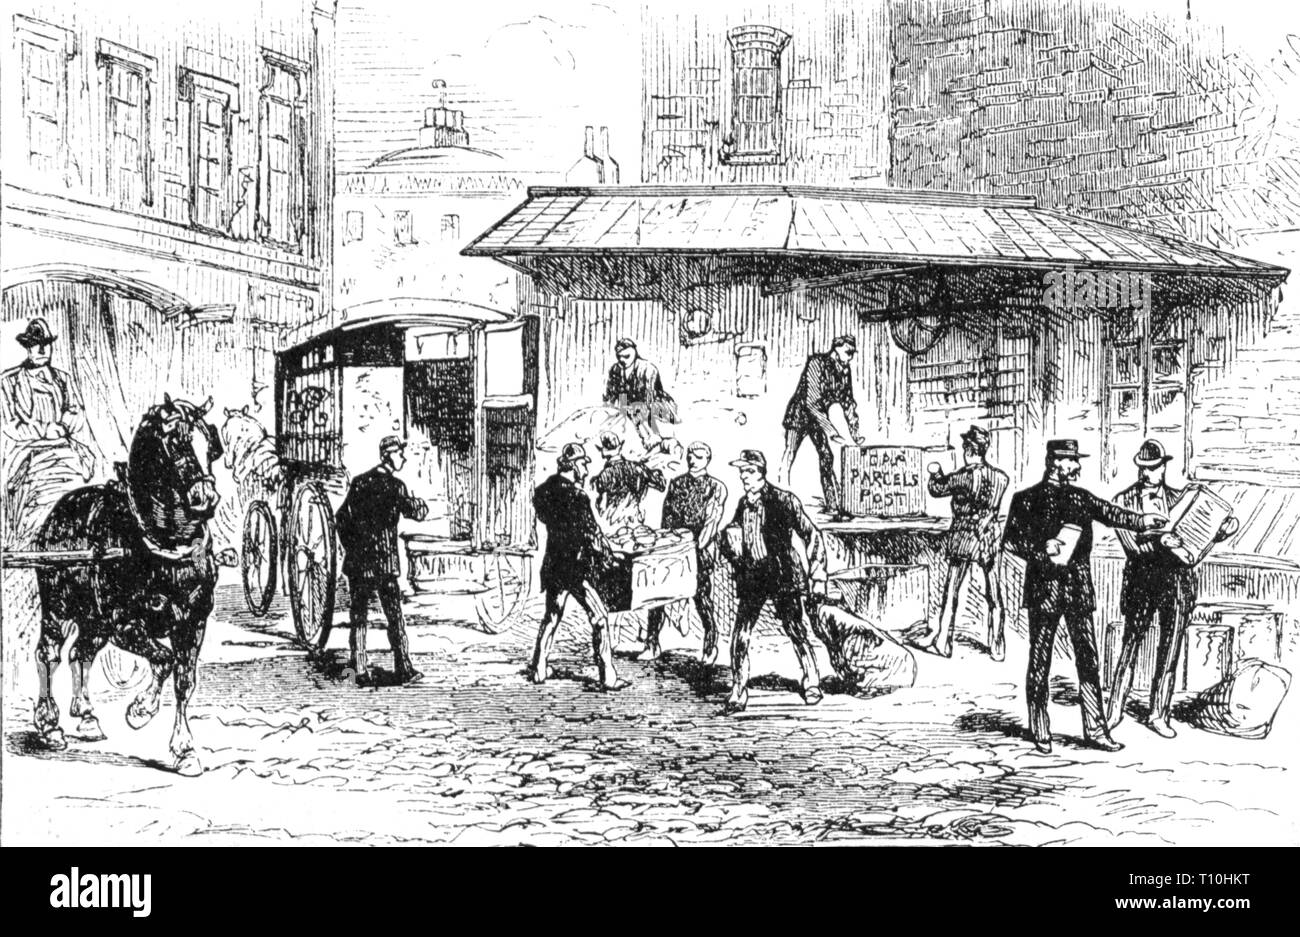 mail, post office, loading of parcels in a British city, wood engraving, 2nd half 19th century, Royal Mail, parcel, parcels, packet, packets, parcel post, transport, coach, carriage, coaches, carriages, load, upload, uploading, people, employees, officer, public employee, postal employee, service, services, labour, labor, working, work, profession, professions, men, man, everyday life, daily routine, Great Britain, United Kingdom, Victorian era, mail, post, post office, post offices, loading, lading, historic, historical, Artist's Copyright has not to be cleared Stock Photo